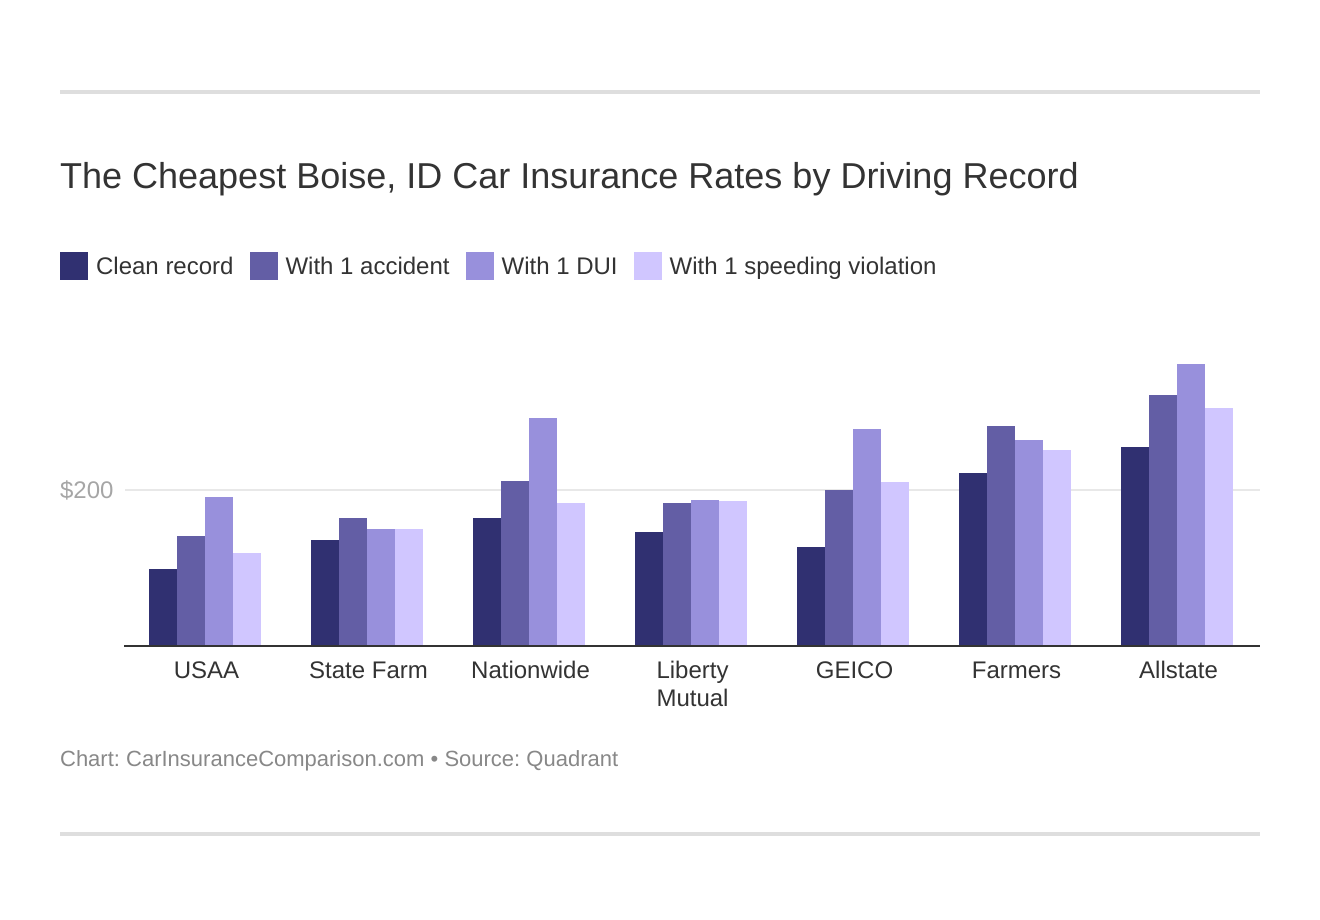 The Cheapest Boise, ID Car Insurance Rates by Driving Record